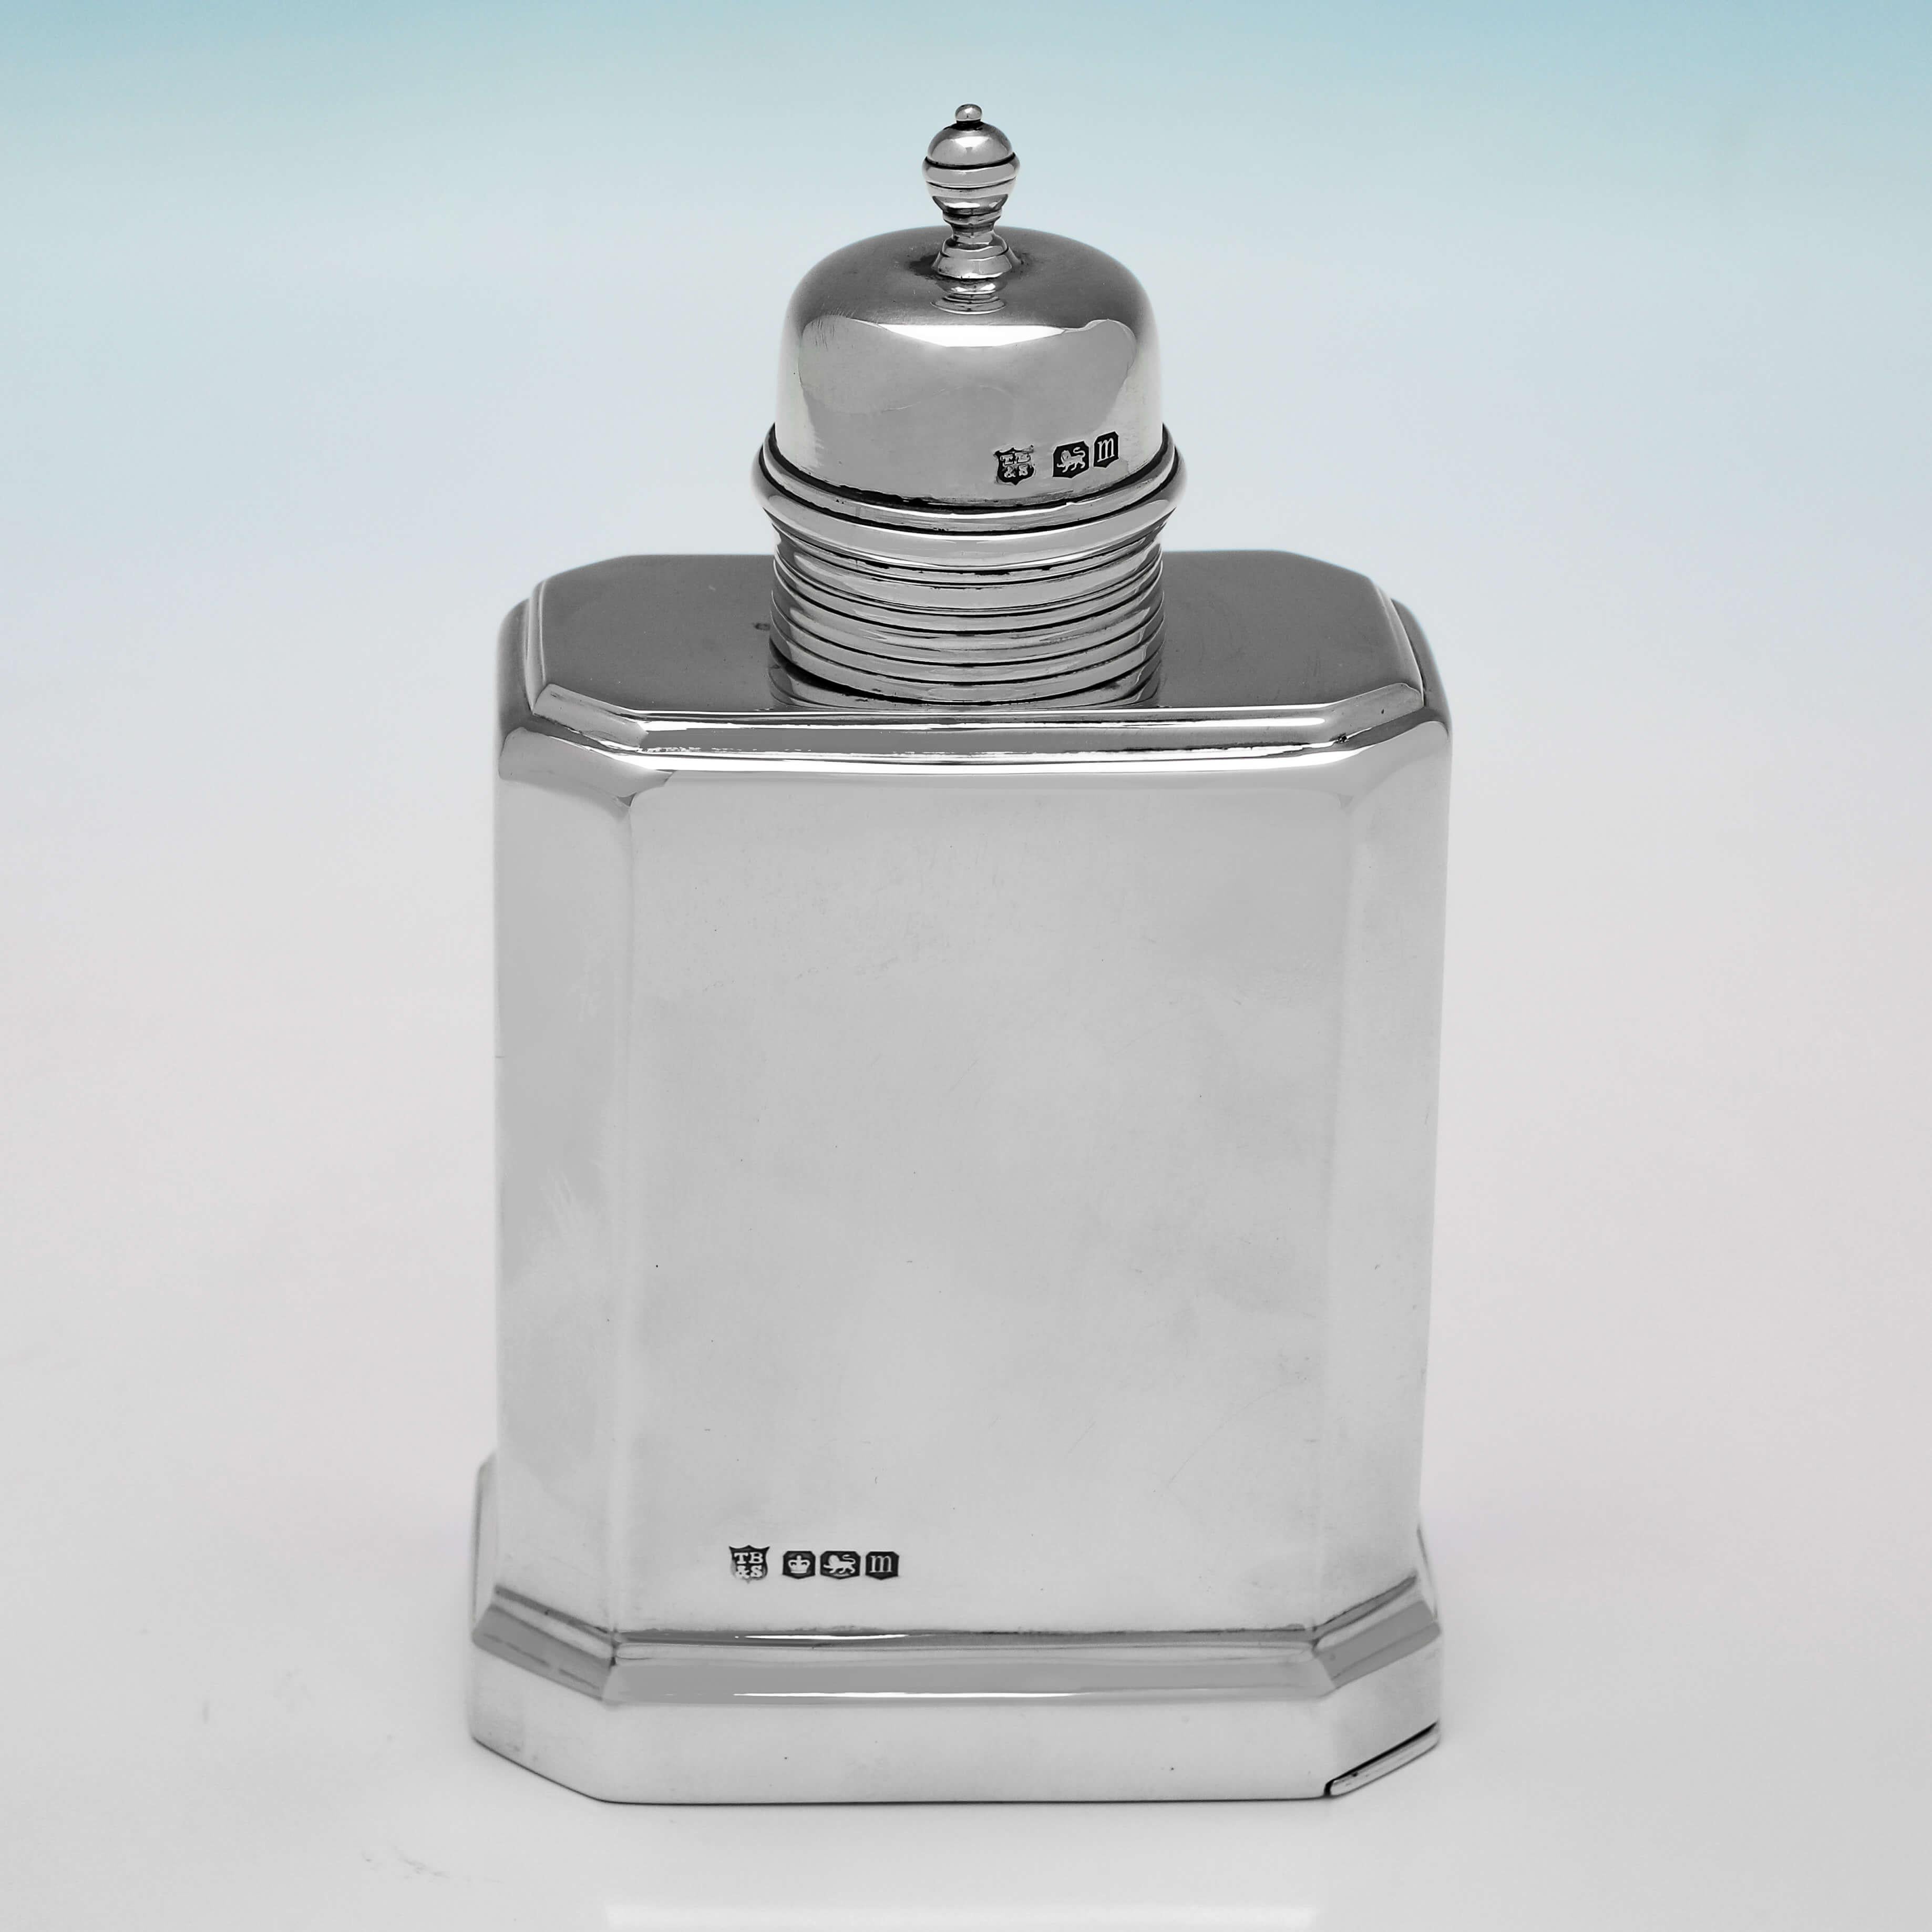 Hallmarked in Sheffield in 1929 by Thomas Bradbury & Sons, this handsome, Sterling Silver Tea Caddy, is a fine reproduction of a Queen Anne period caddy, with a slide off base, and removable cap. 

The tea caddy measures 5.25